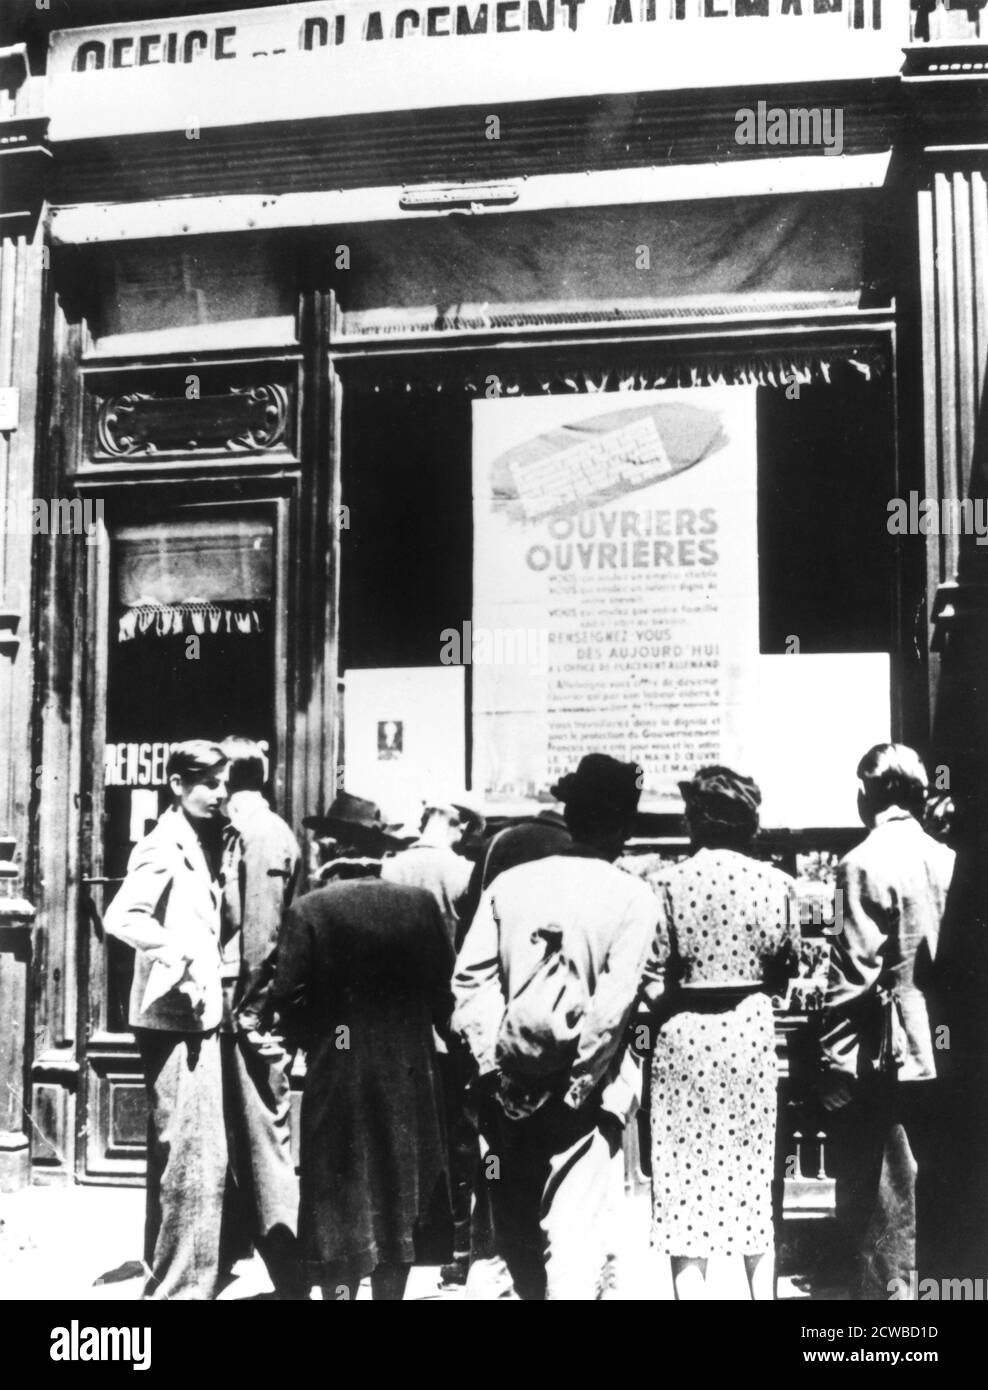 Citizens of Paris outside a German labour recruitment office, 1940-1944. Faced with a decline in the supply of forced labour from occupied Poland and Russia, the Nazis demanded France send 250,000 labourers to Germany by the end of 1942. The Germans agreed to repatriate one French prisoner of war for every three volunteer labourers. But the number of volunteers was insufficient and a form of conscription was introduced. By the time France was liberated an estimated 650,000 men and 44,000 women had been sent to work in Germany. The photographer is unknown. Stock Photo